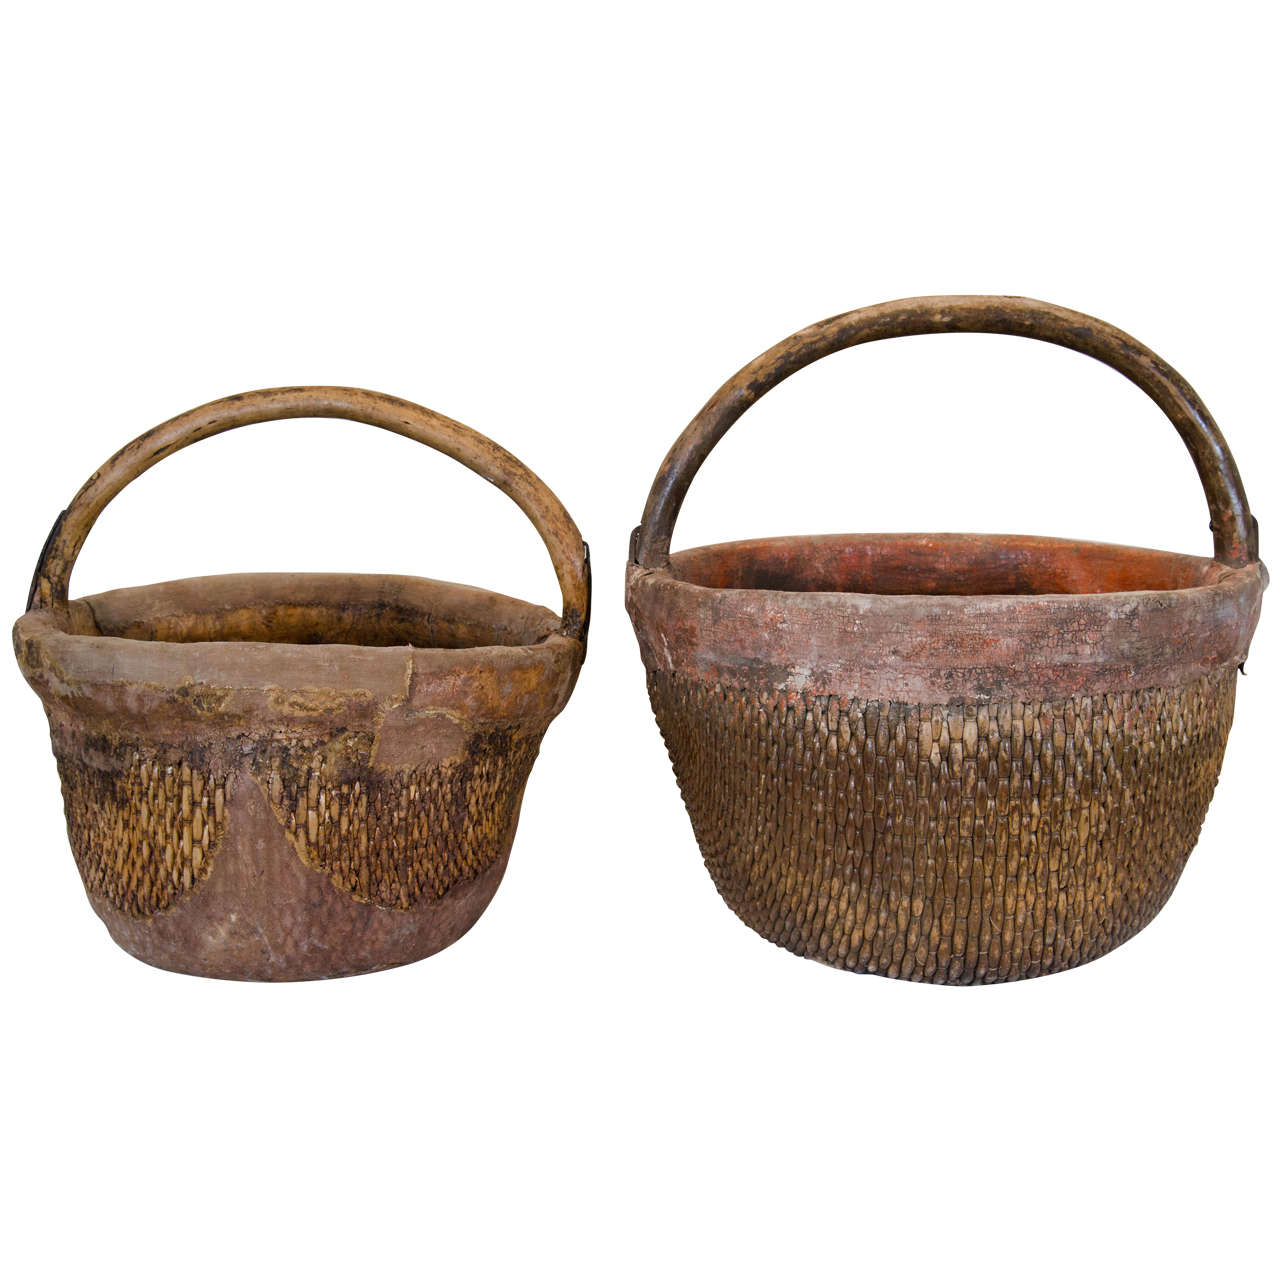 Antique Chinese Willow & Clay Baskets For Sale